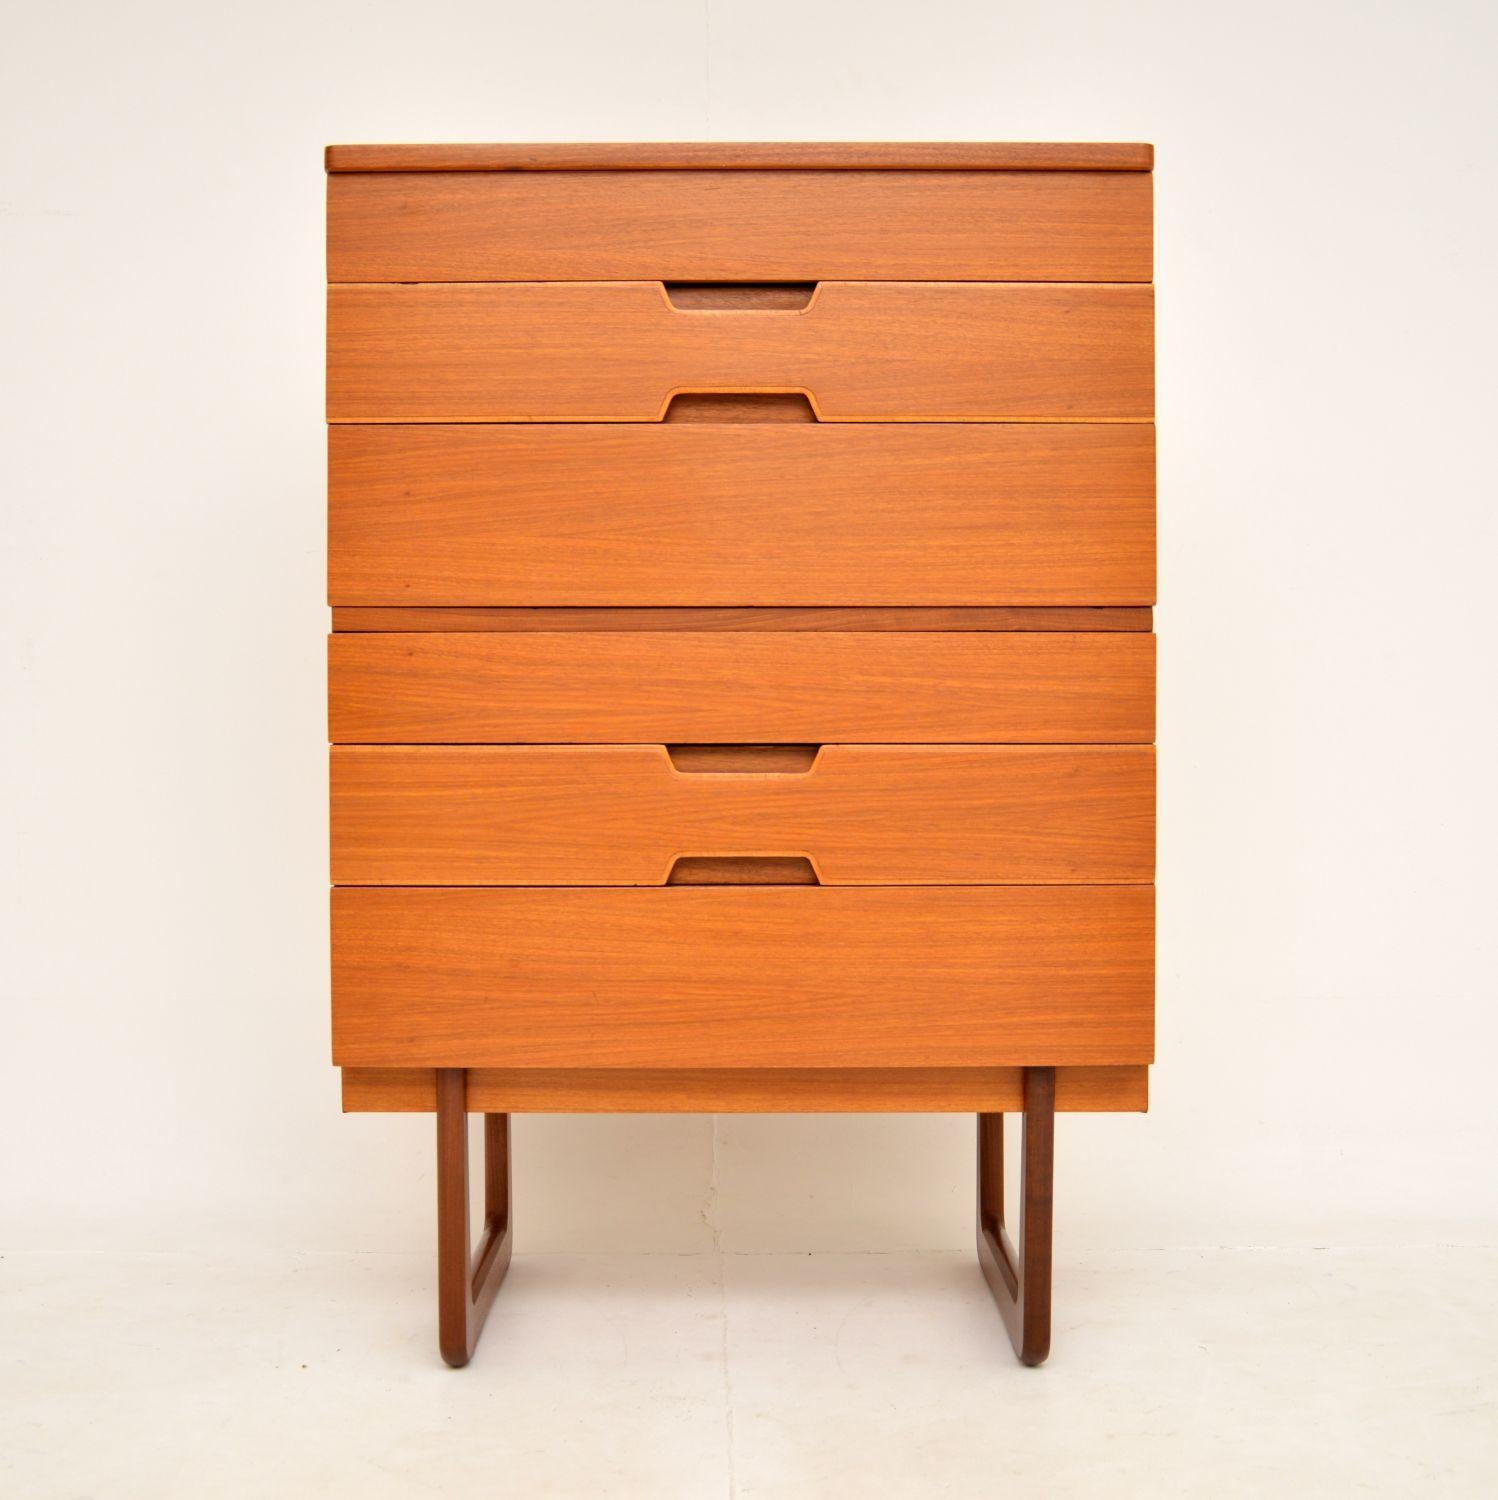 A large and stylish vintage chest of drawers in walnut, designed by Gunther Hoffstead for Uniflex. This was made in England, it dates from the 1950-60’s.

The quality and design is superb, with lovely recessed handles and beautiful U shaped legs.